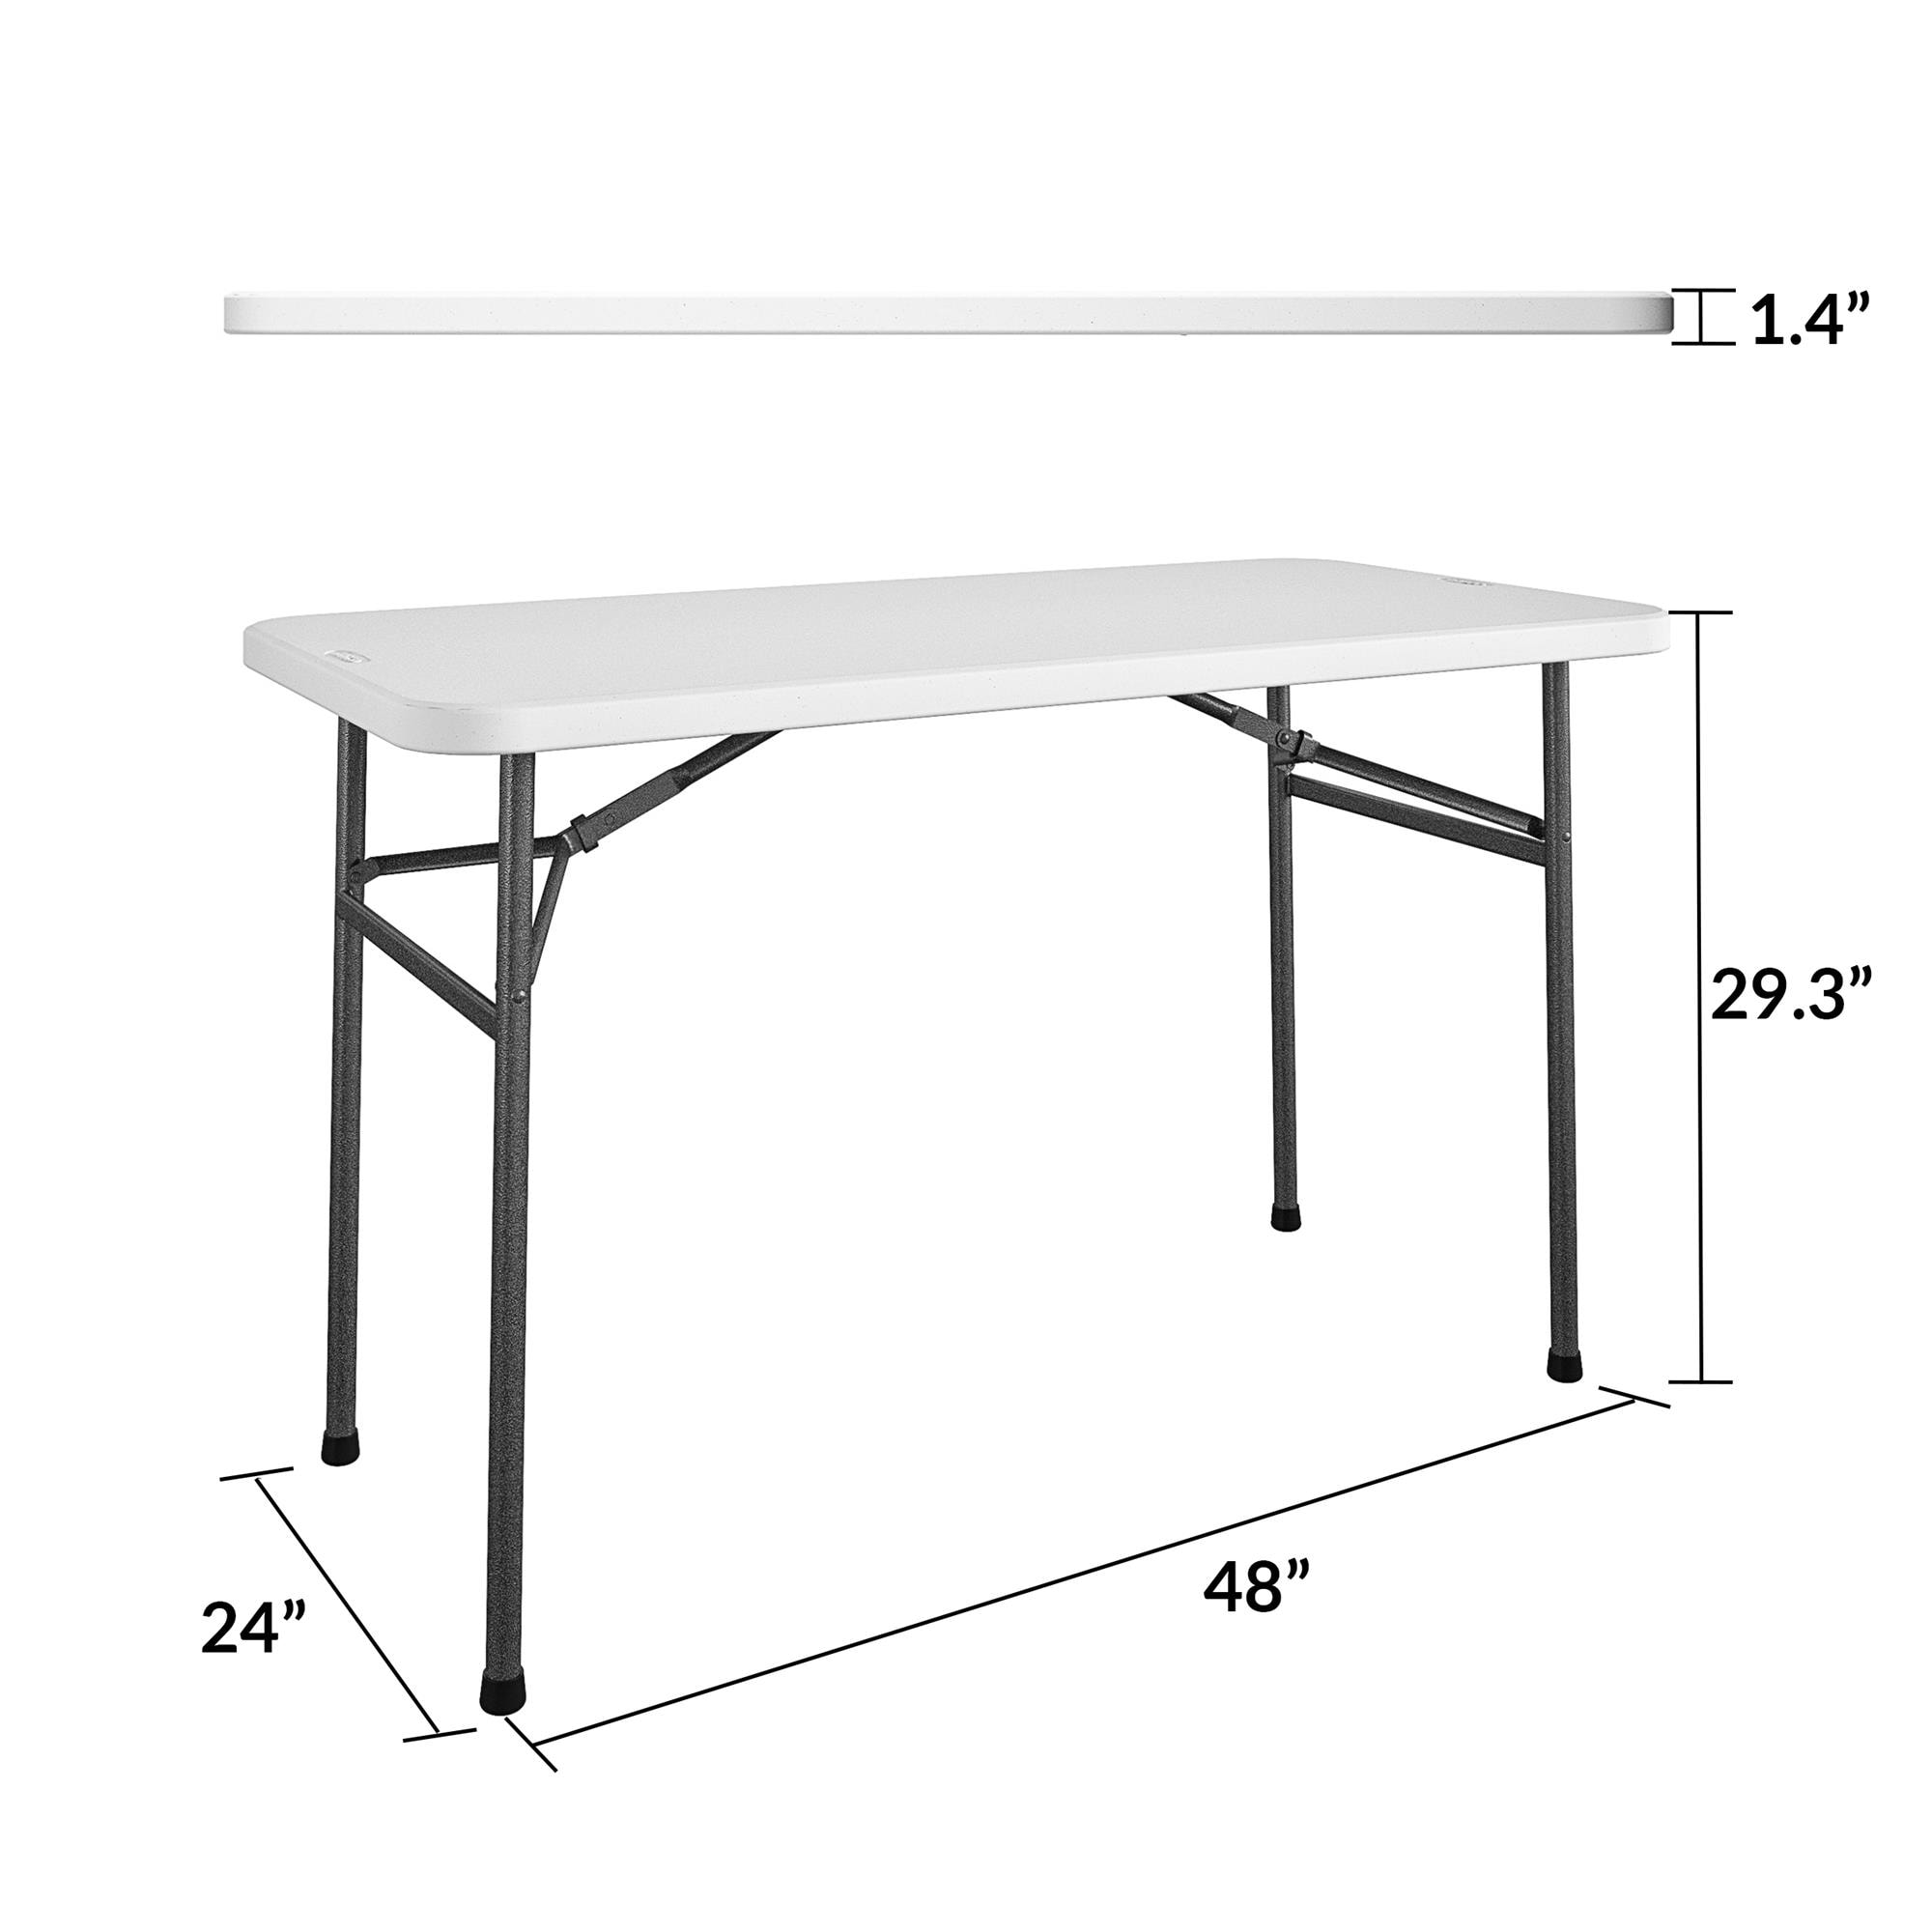 Cosco 2.83-ft x 2.83-ft Indoor Square Vinyl Black Folding Dining Table  (4-Person)